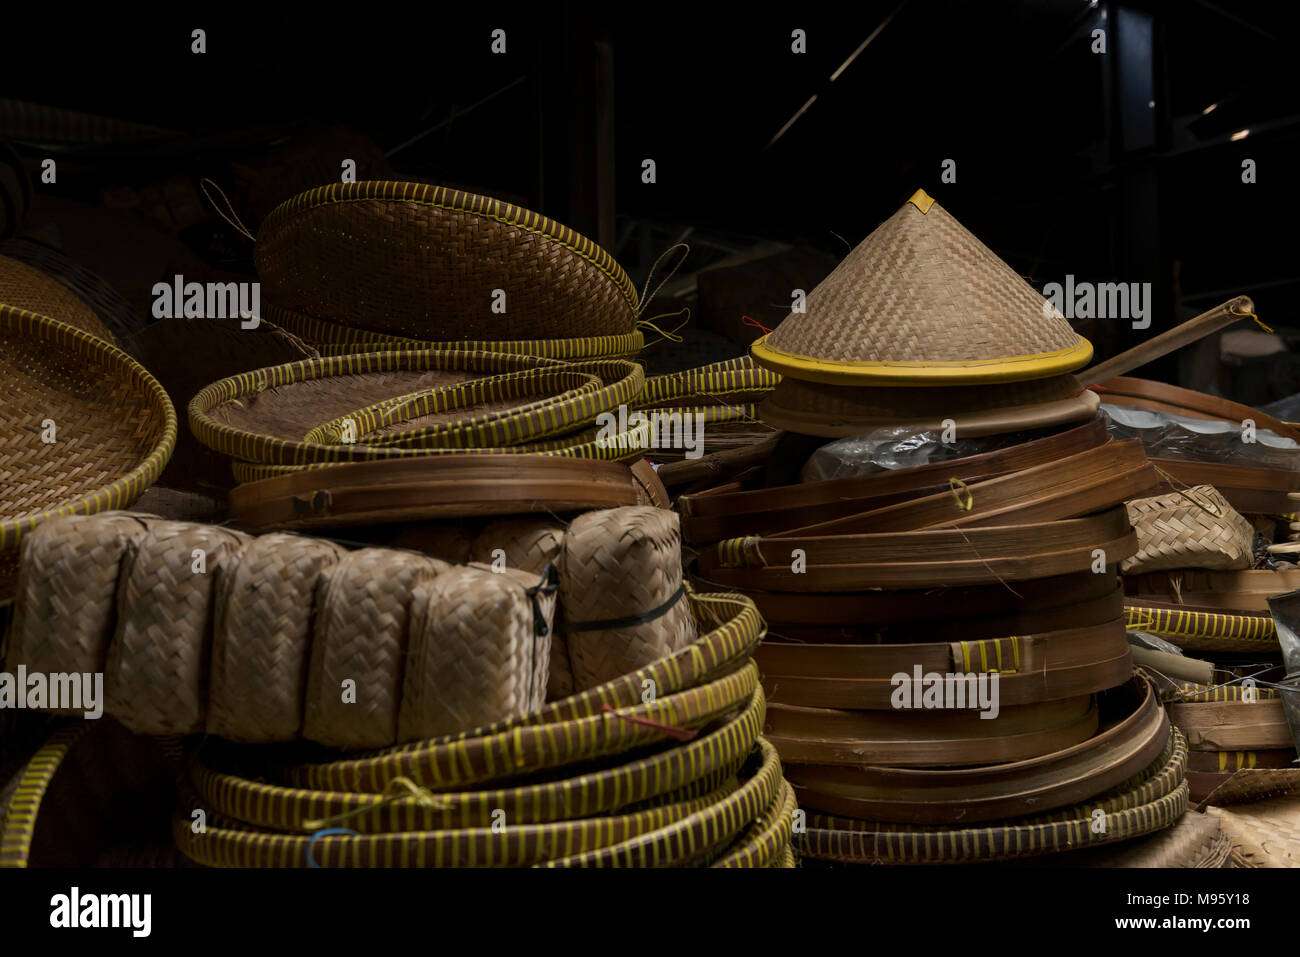 Conical hat, bamboo basket and trays Stock Photo